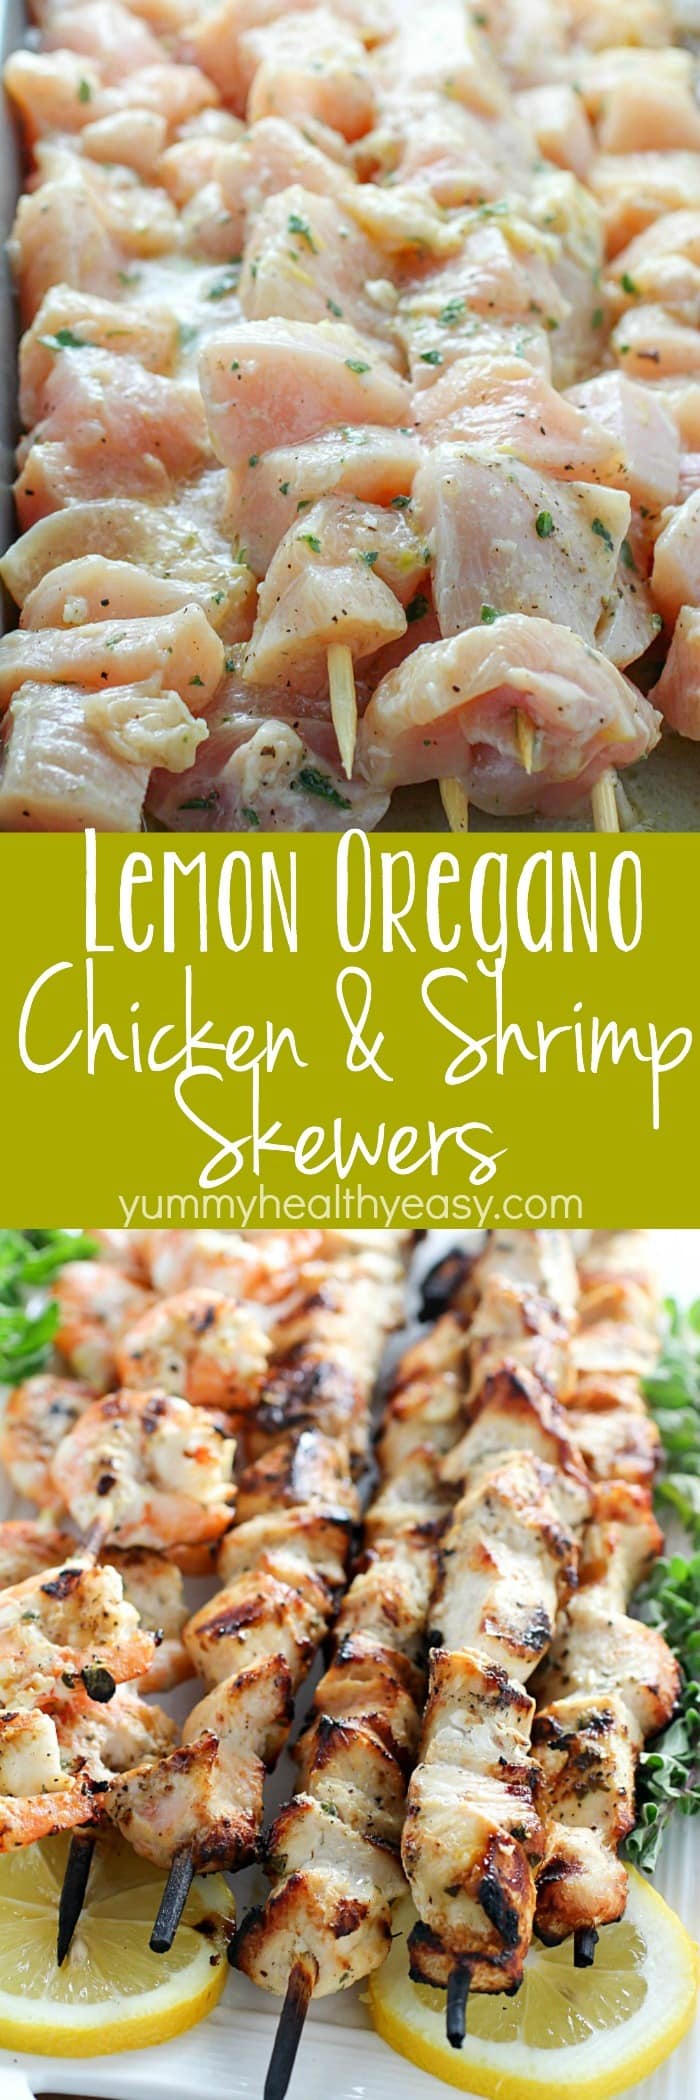 Lemon Oregano Chicken & Shrimp Skewers are marinated and then grilled for a delicious and healthy dinner recipe! Cue the hallelujah chorus! Deliciousness on a stick! This is also great for meal prepping! (high protein, paleo and clean eating)